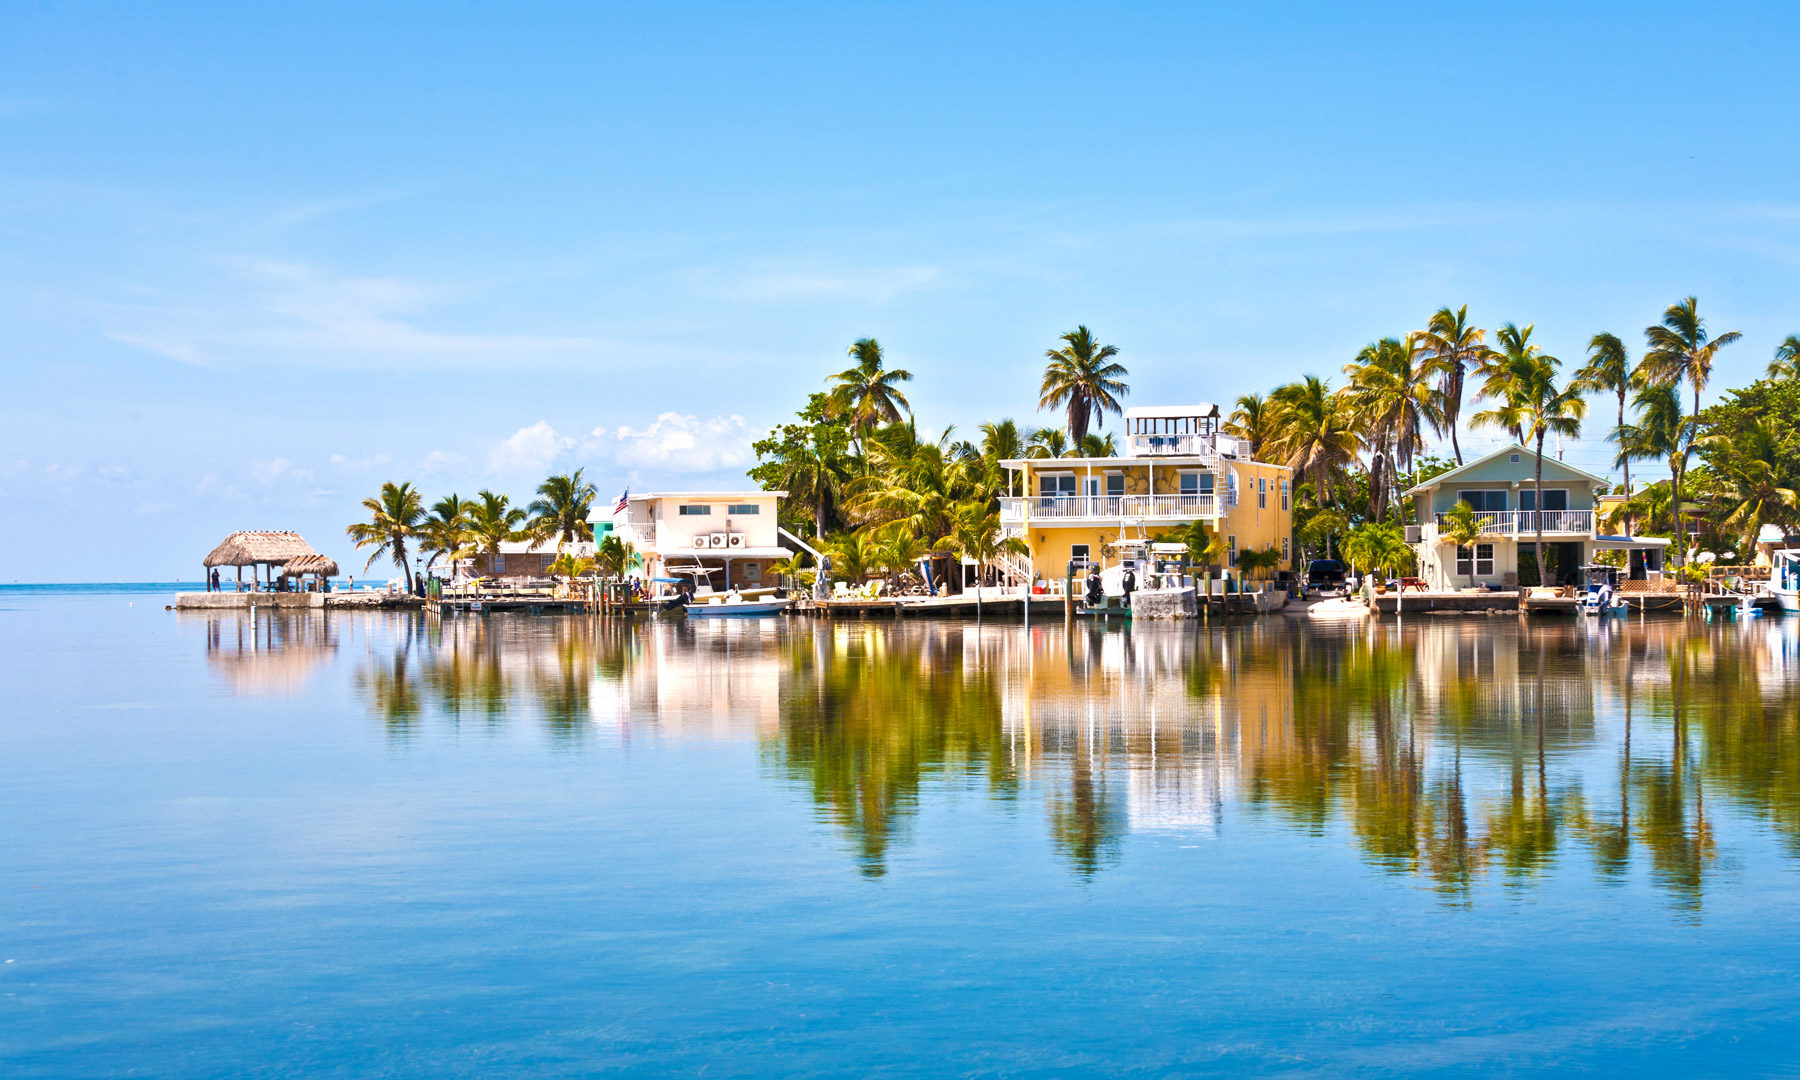 Best Boutique Hotels in the Florida Keys